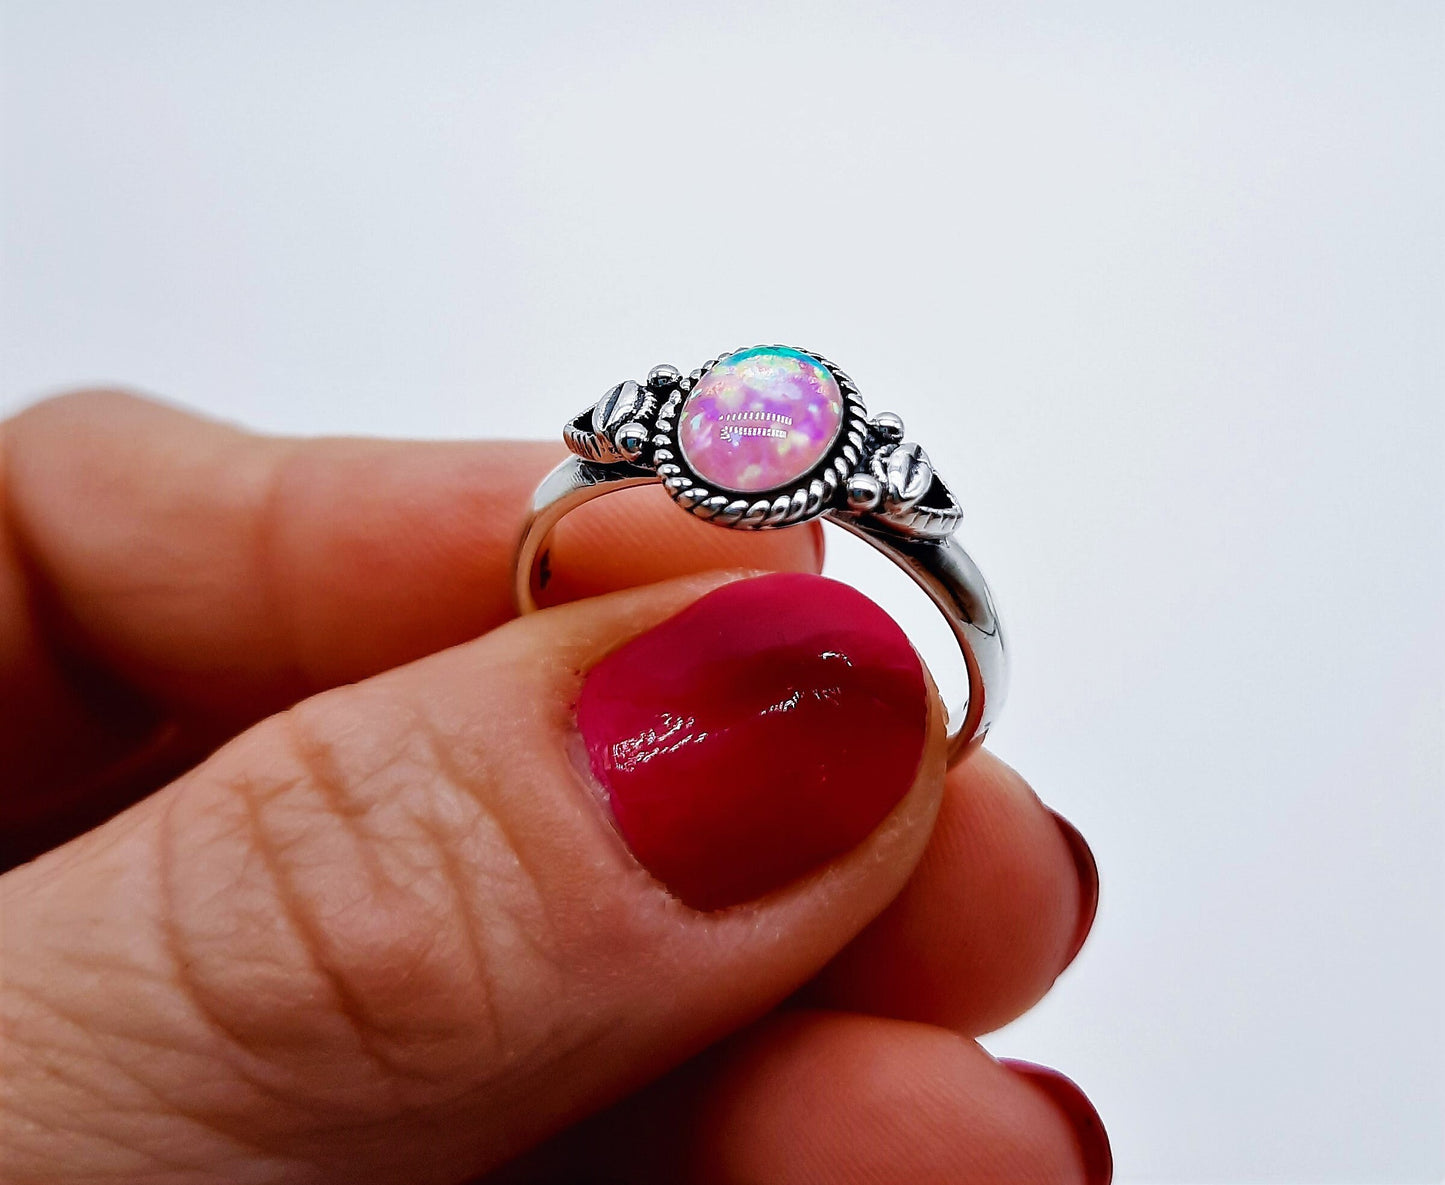 Handcrafted / Handmade Intricate Antiqued 925 Sterling Silver Ring, Genuine Pink Opal Stone, Domed with Holographic Resin